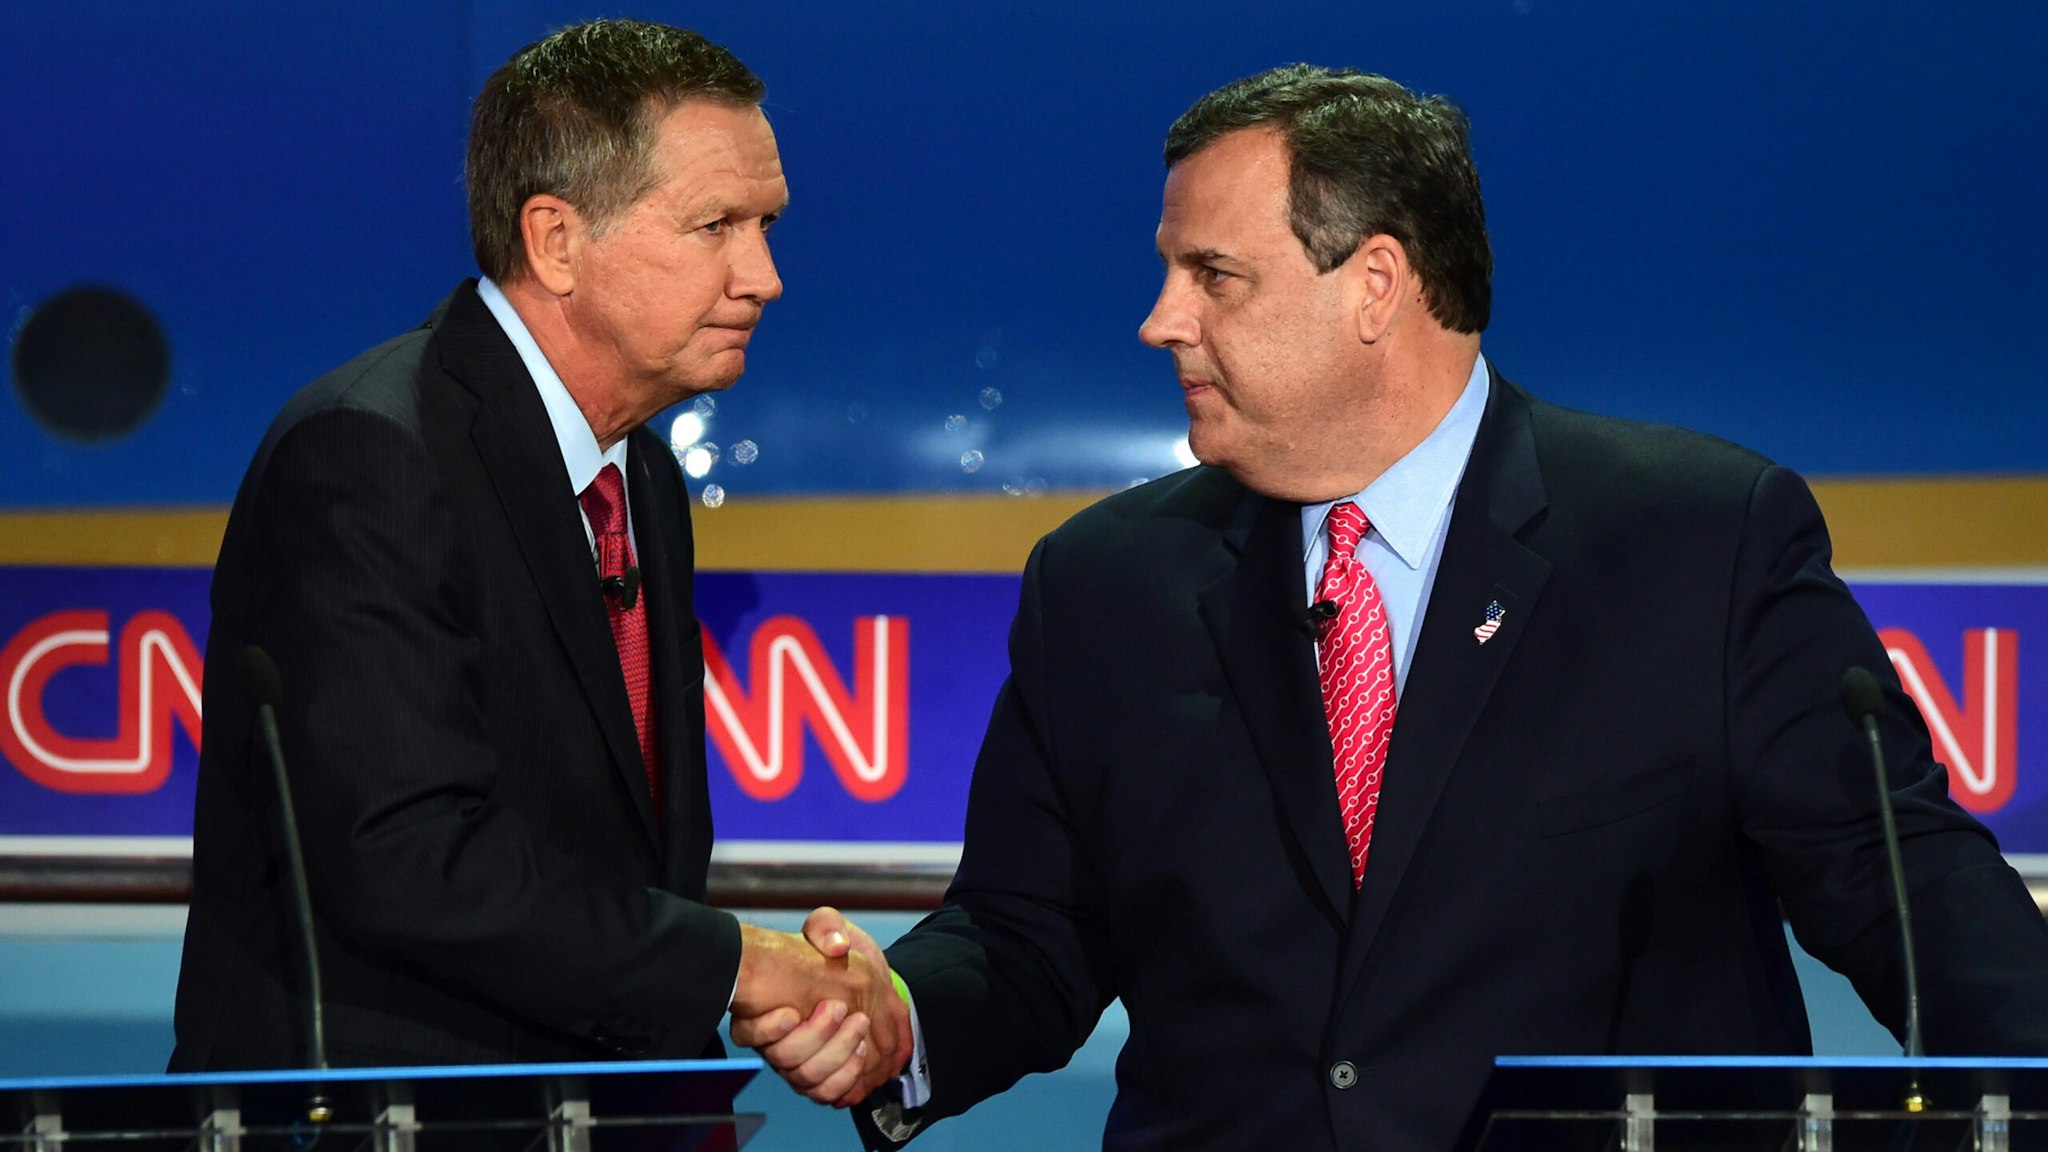 Republican presidential hopefuls, Ohio Gov. John Kasich (L) shakes hands with New Jersey Gov. Chris Christie during the Presidential debate at the Ronald Reagan Presidential Library in Simi Valley, California on September 16, 2015. Republican presidential frontrunner Donald Trump stepped into a campaign hornet's nest as his rivals collectively turned their sights on the billionaire in the party's second debate of the 2016 presidential race.